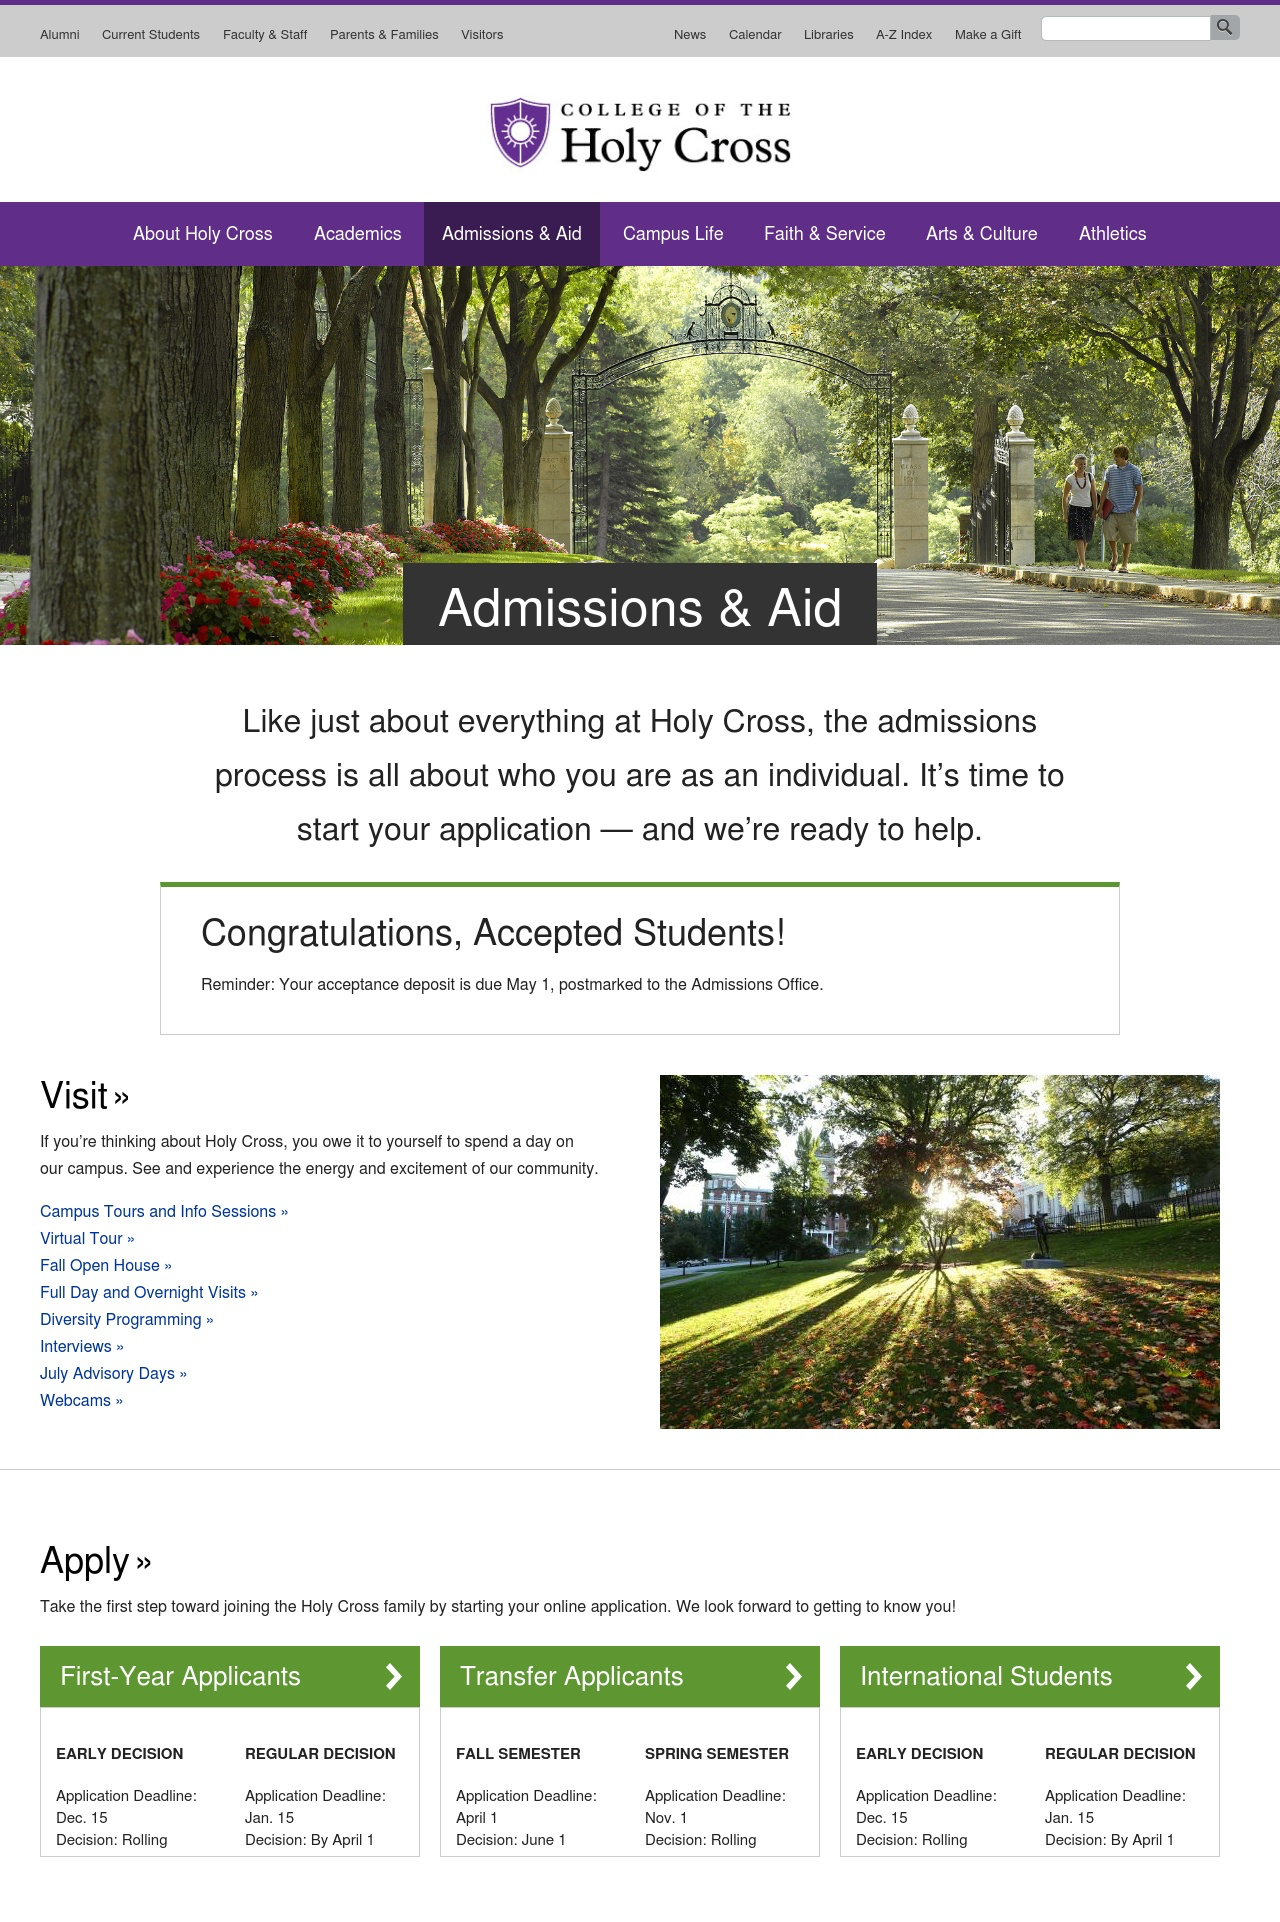 College of the Holy Cross Admissions & Aid